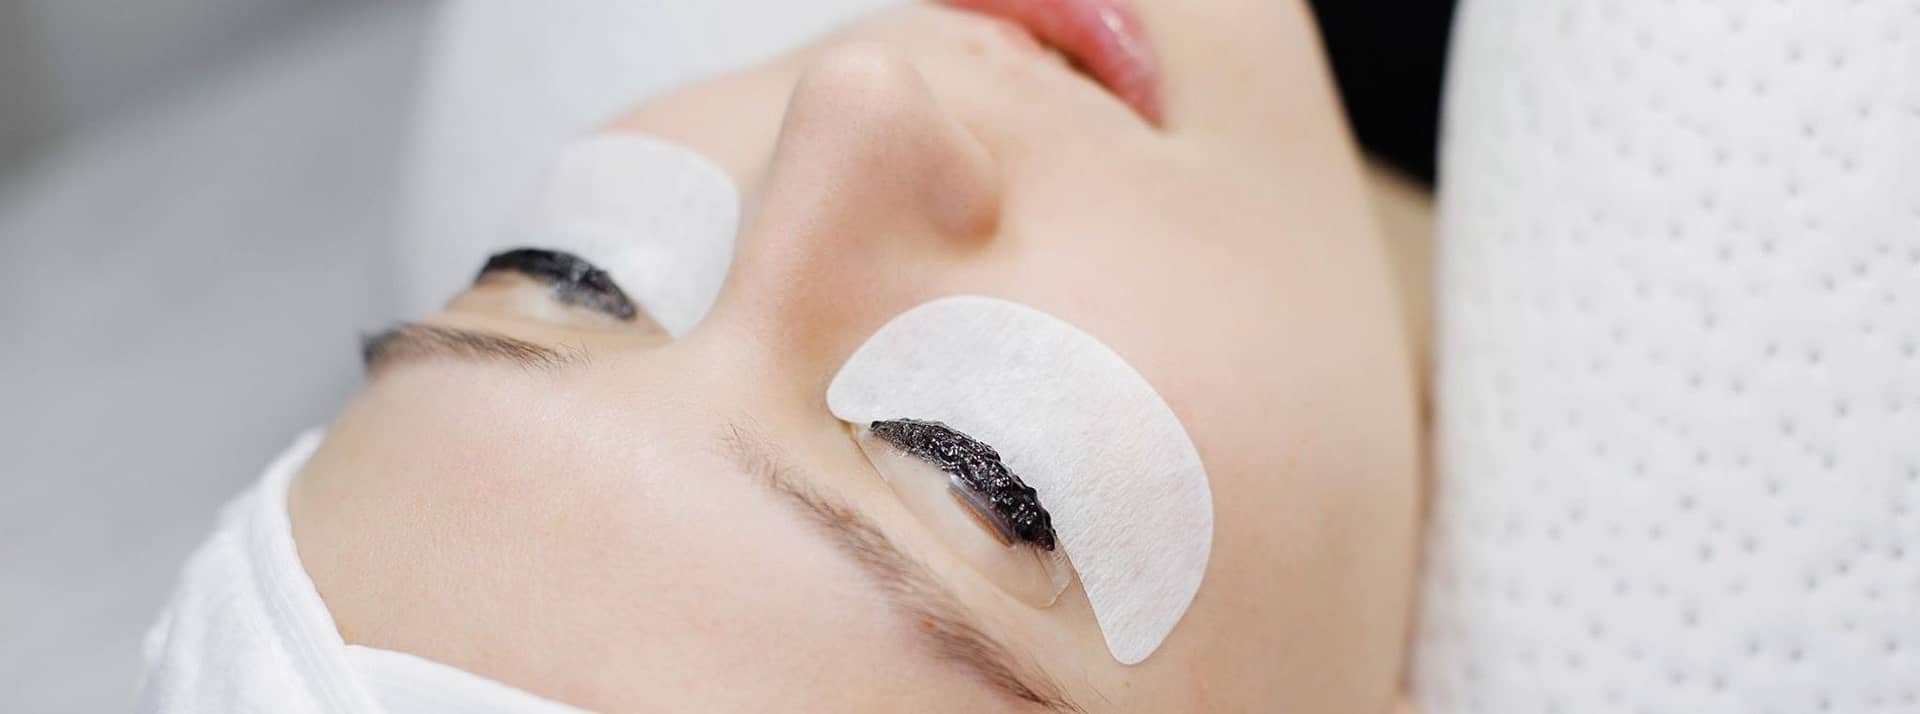 lvl lash procedure by lvl lashes specialist in reigate